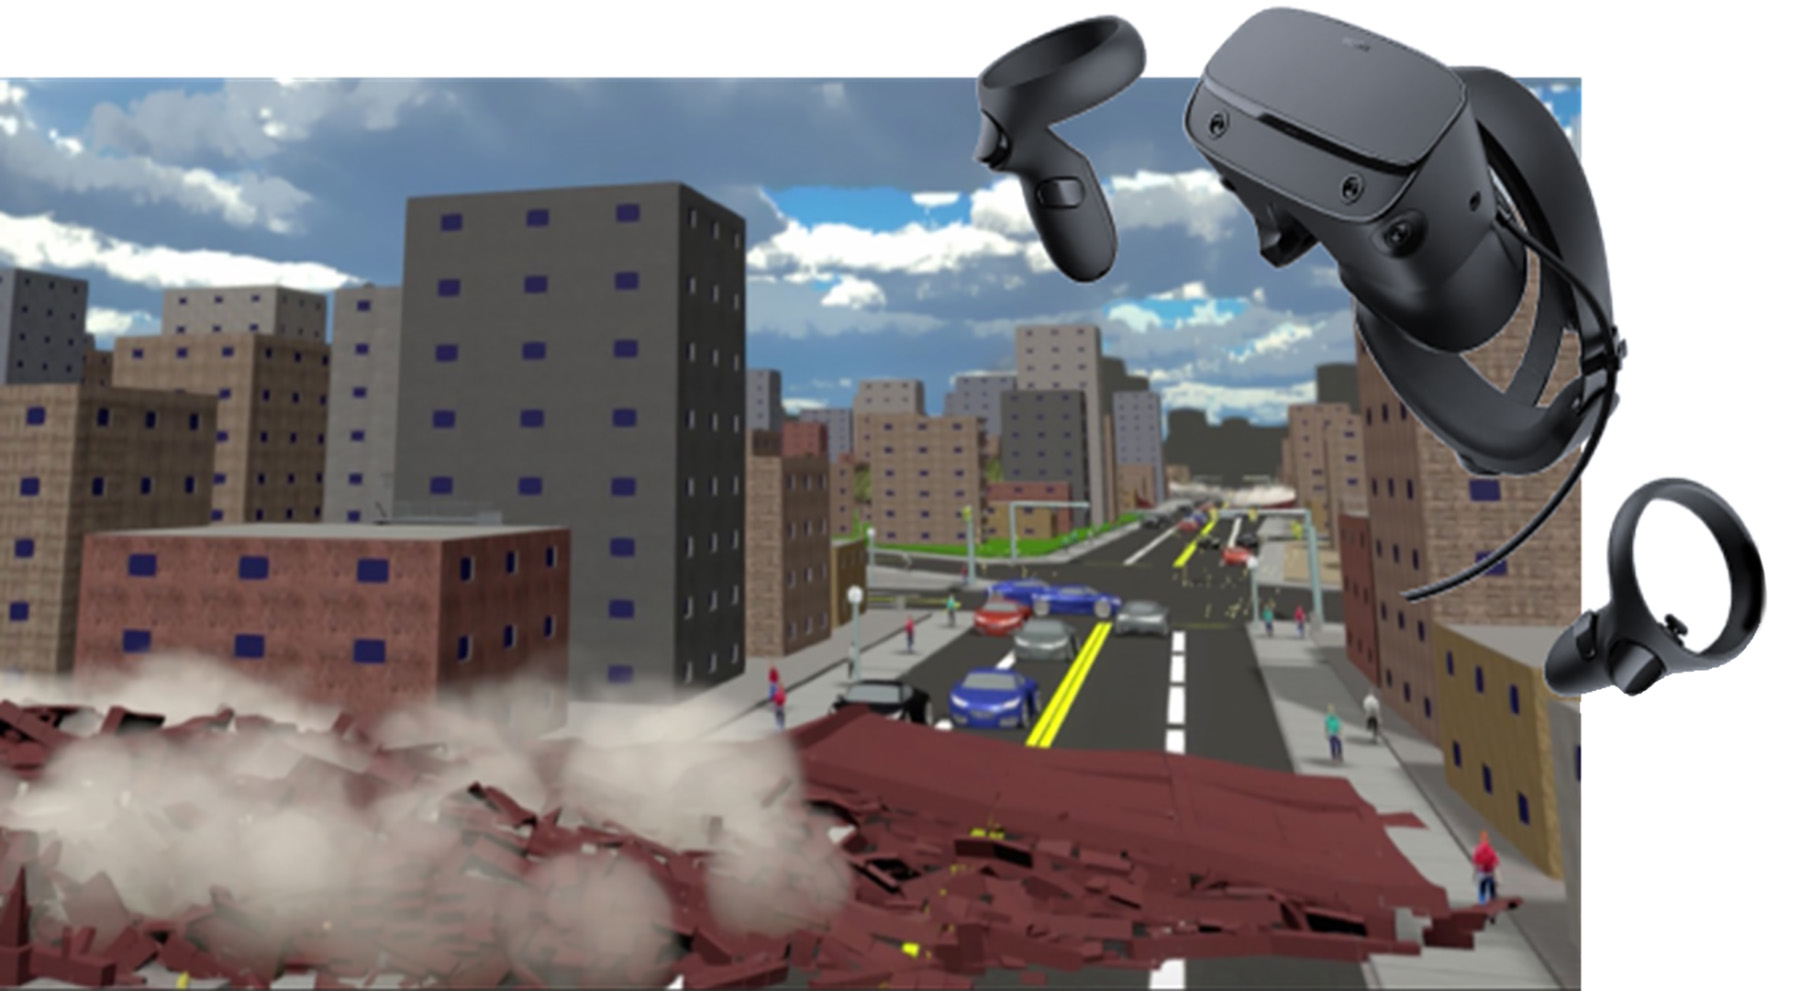 image showing buildings, cars, virtual reality equipment, and a road damaged by an earthquake